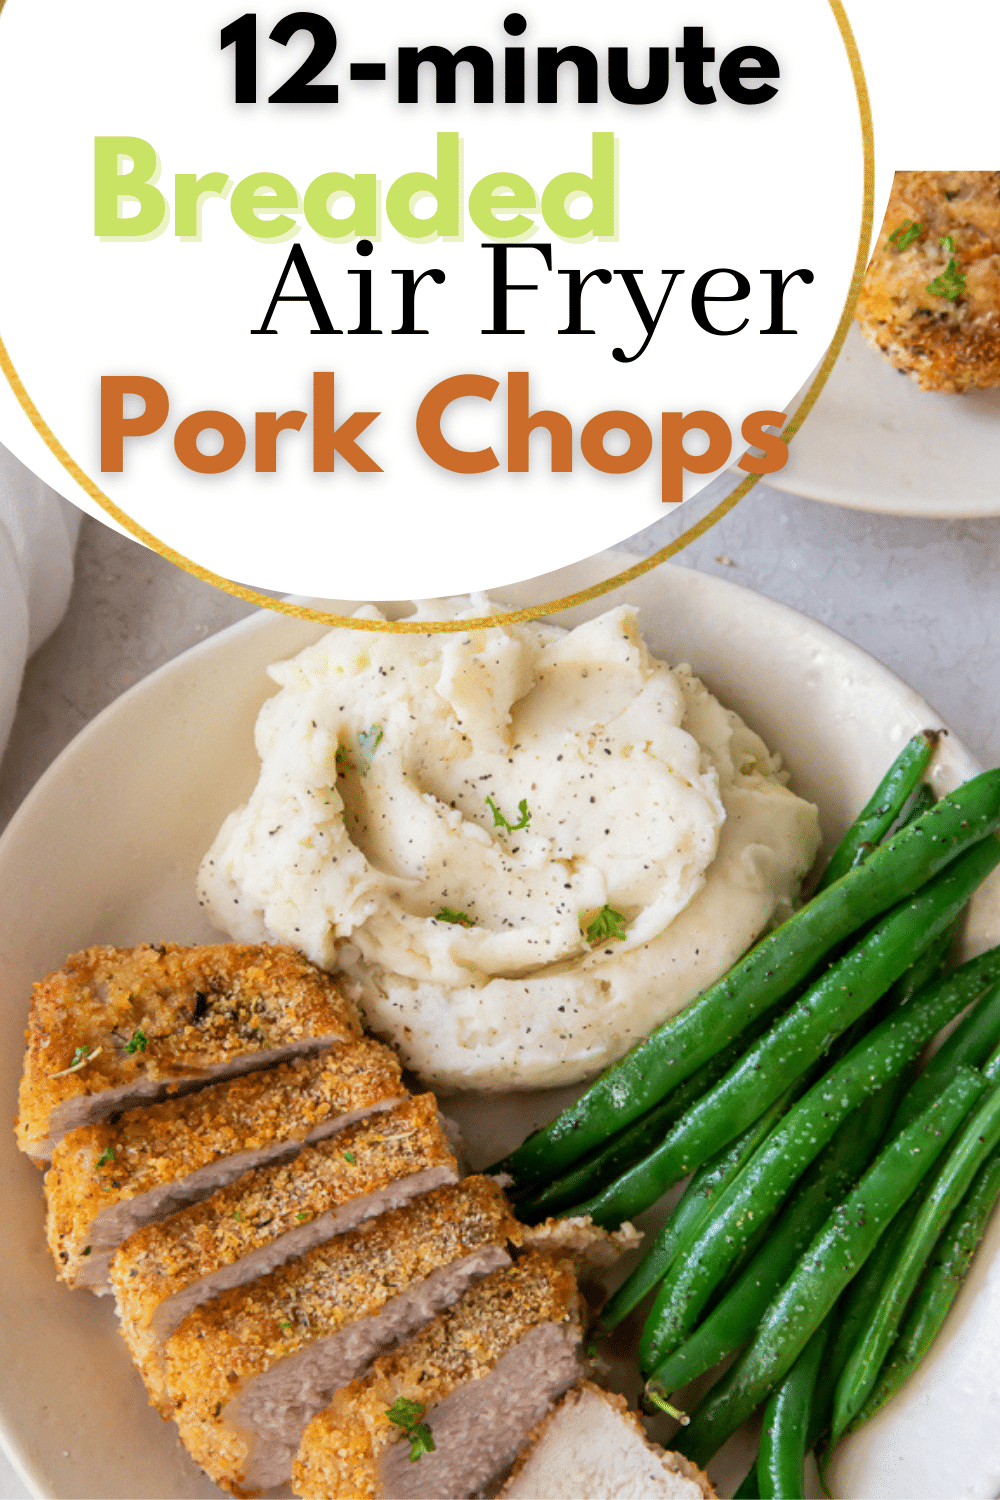 Make the perfect Air Fryer Breaded Pork Chops for dinner! These Air Fryer Pork Chops are perfectly seasoned, lightly breaded, and come out crispy and delicious in under 15 minutes. #airfryerporkchops via @vegetarianmamma